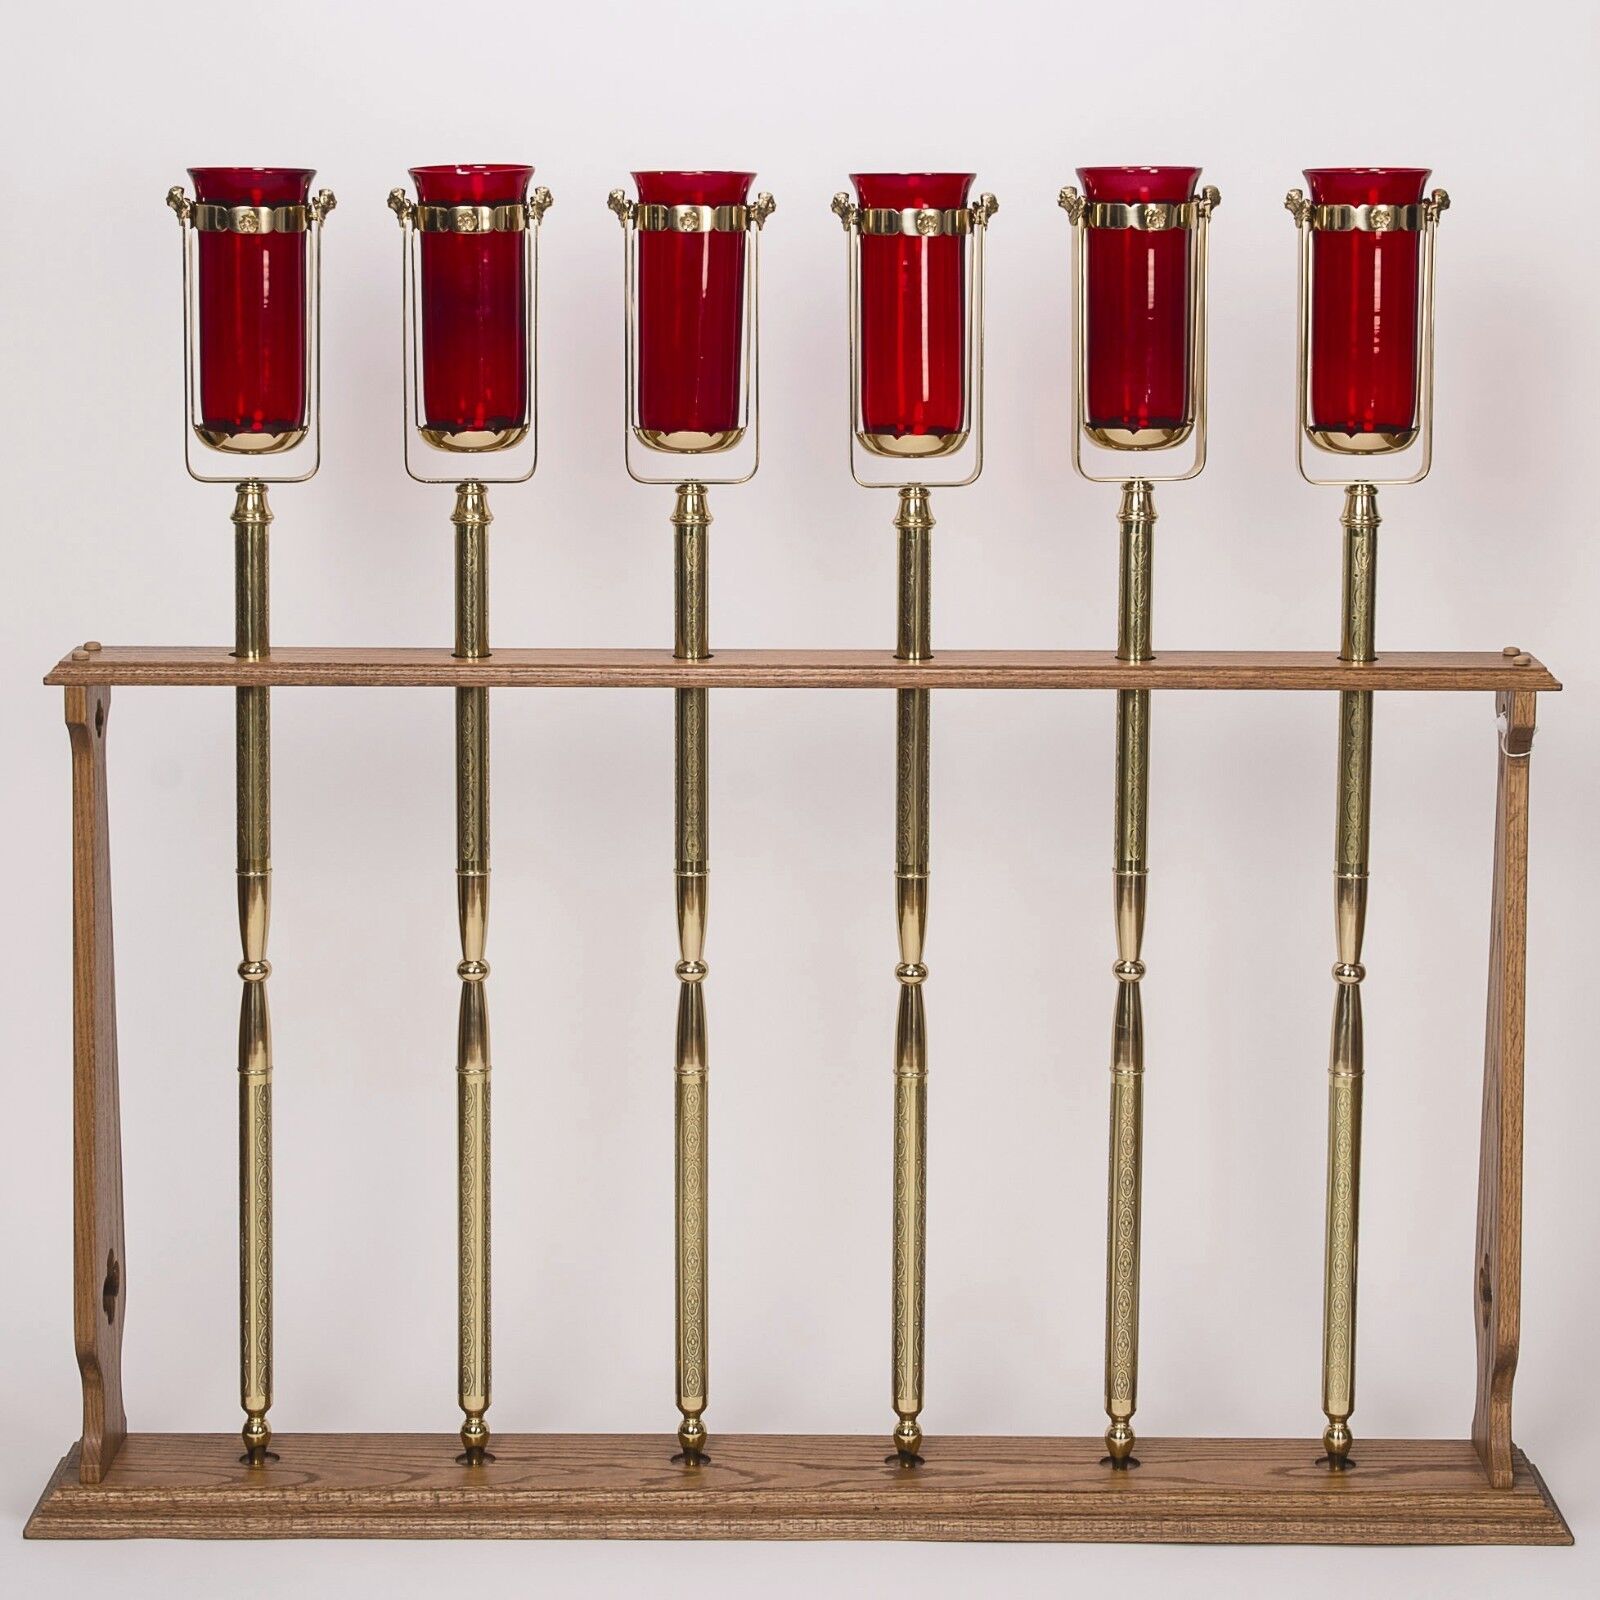 6 Processional Torches - Acolyte Candlesticks - Sanctuary Lamps + + Chalice co. 